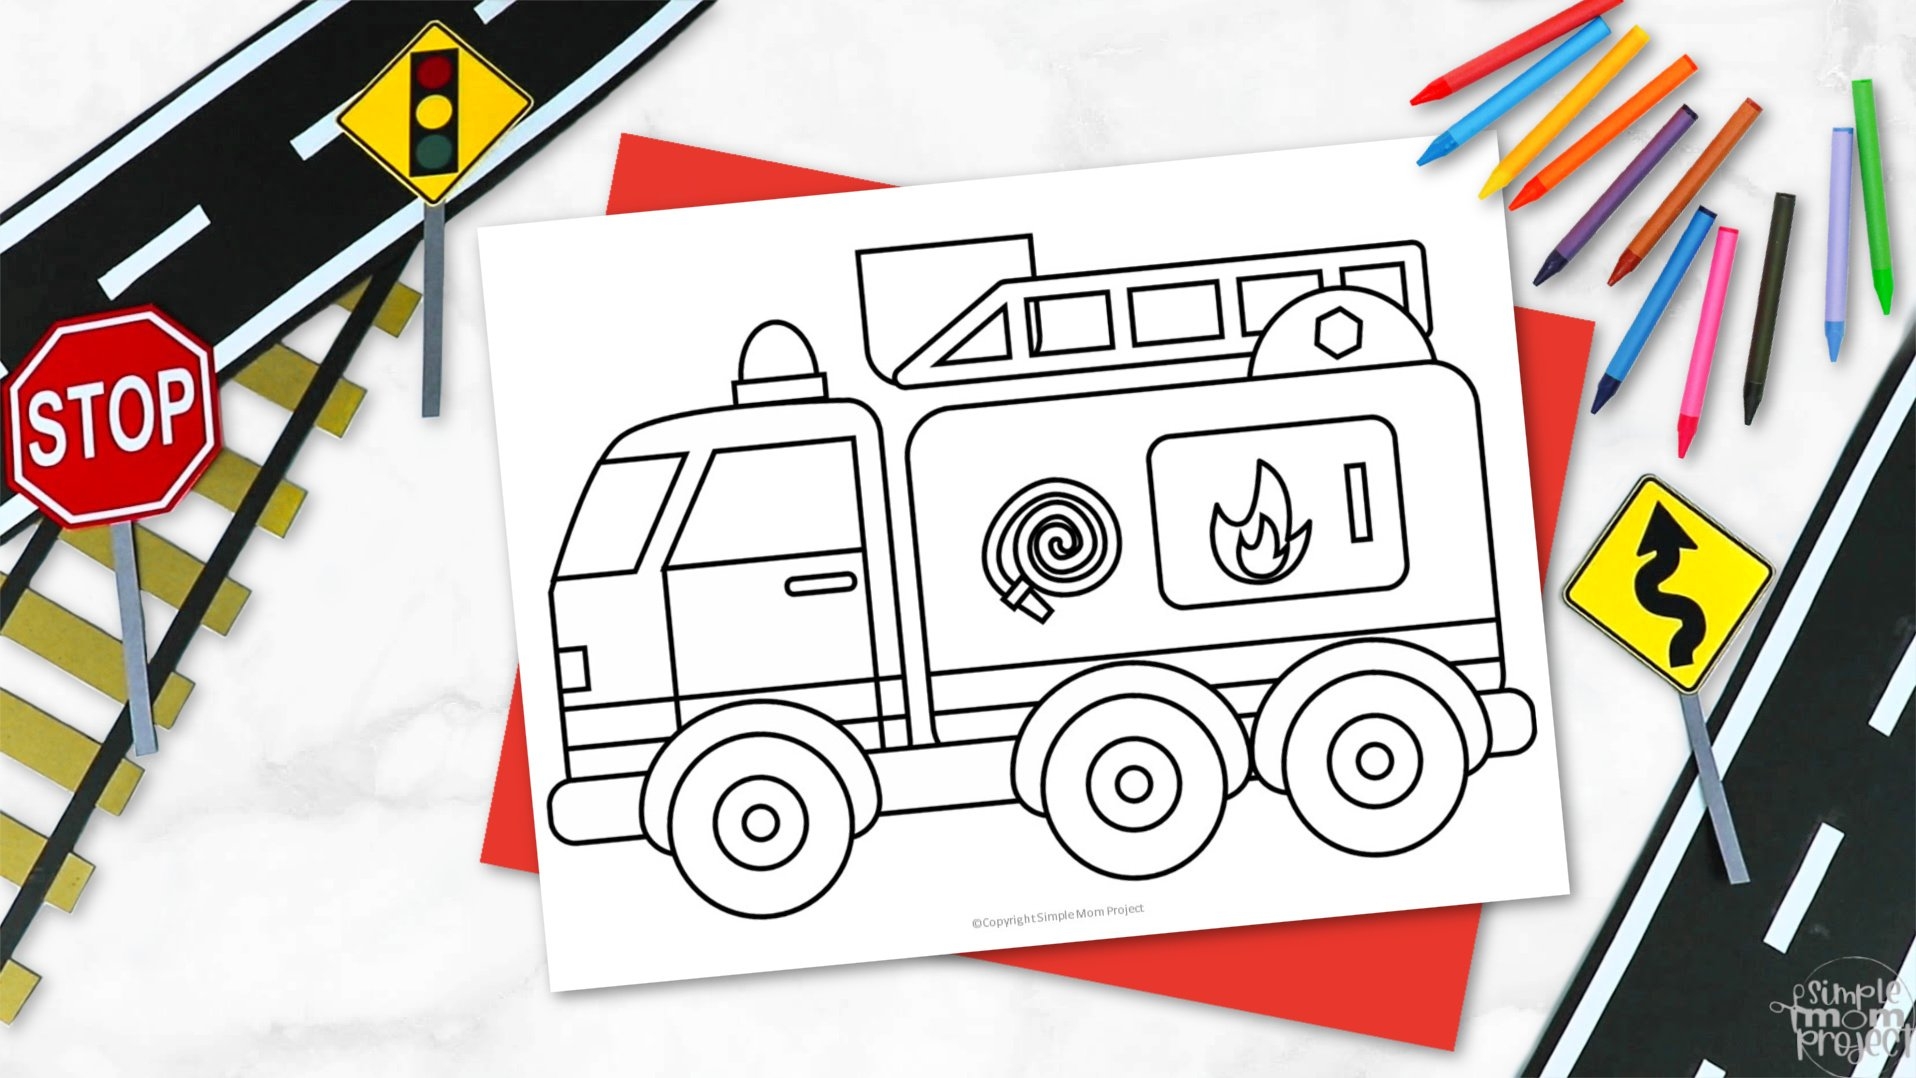 Printable Fire Truck Craft Template